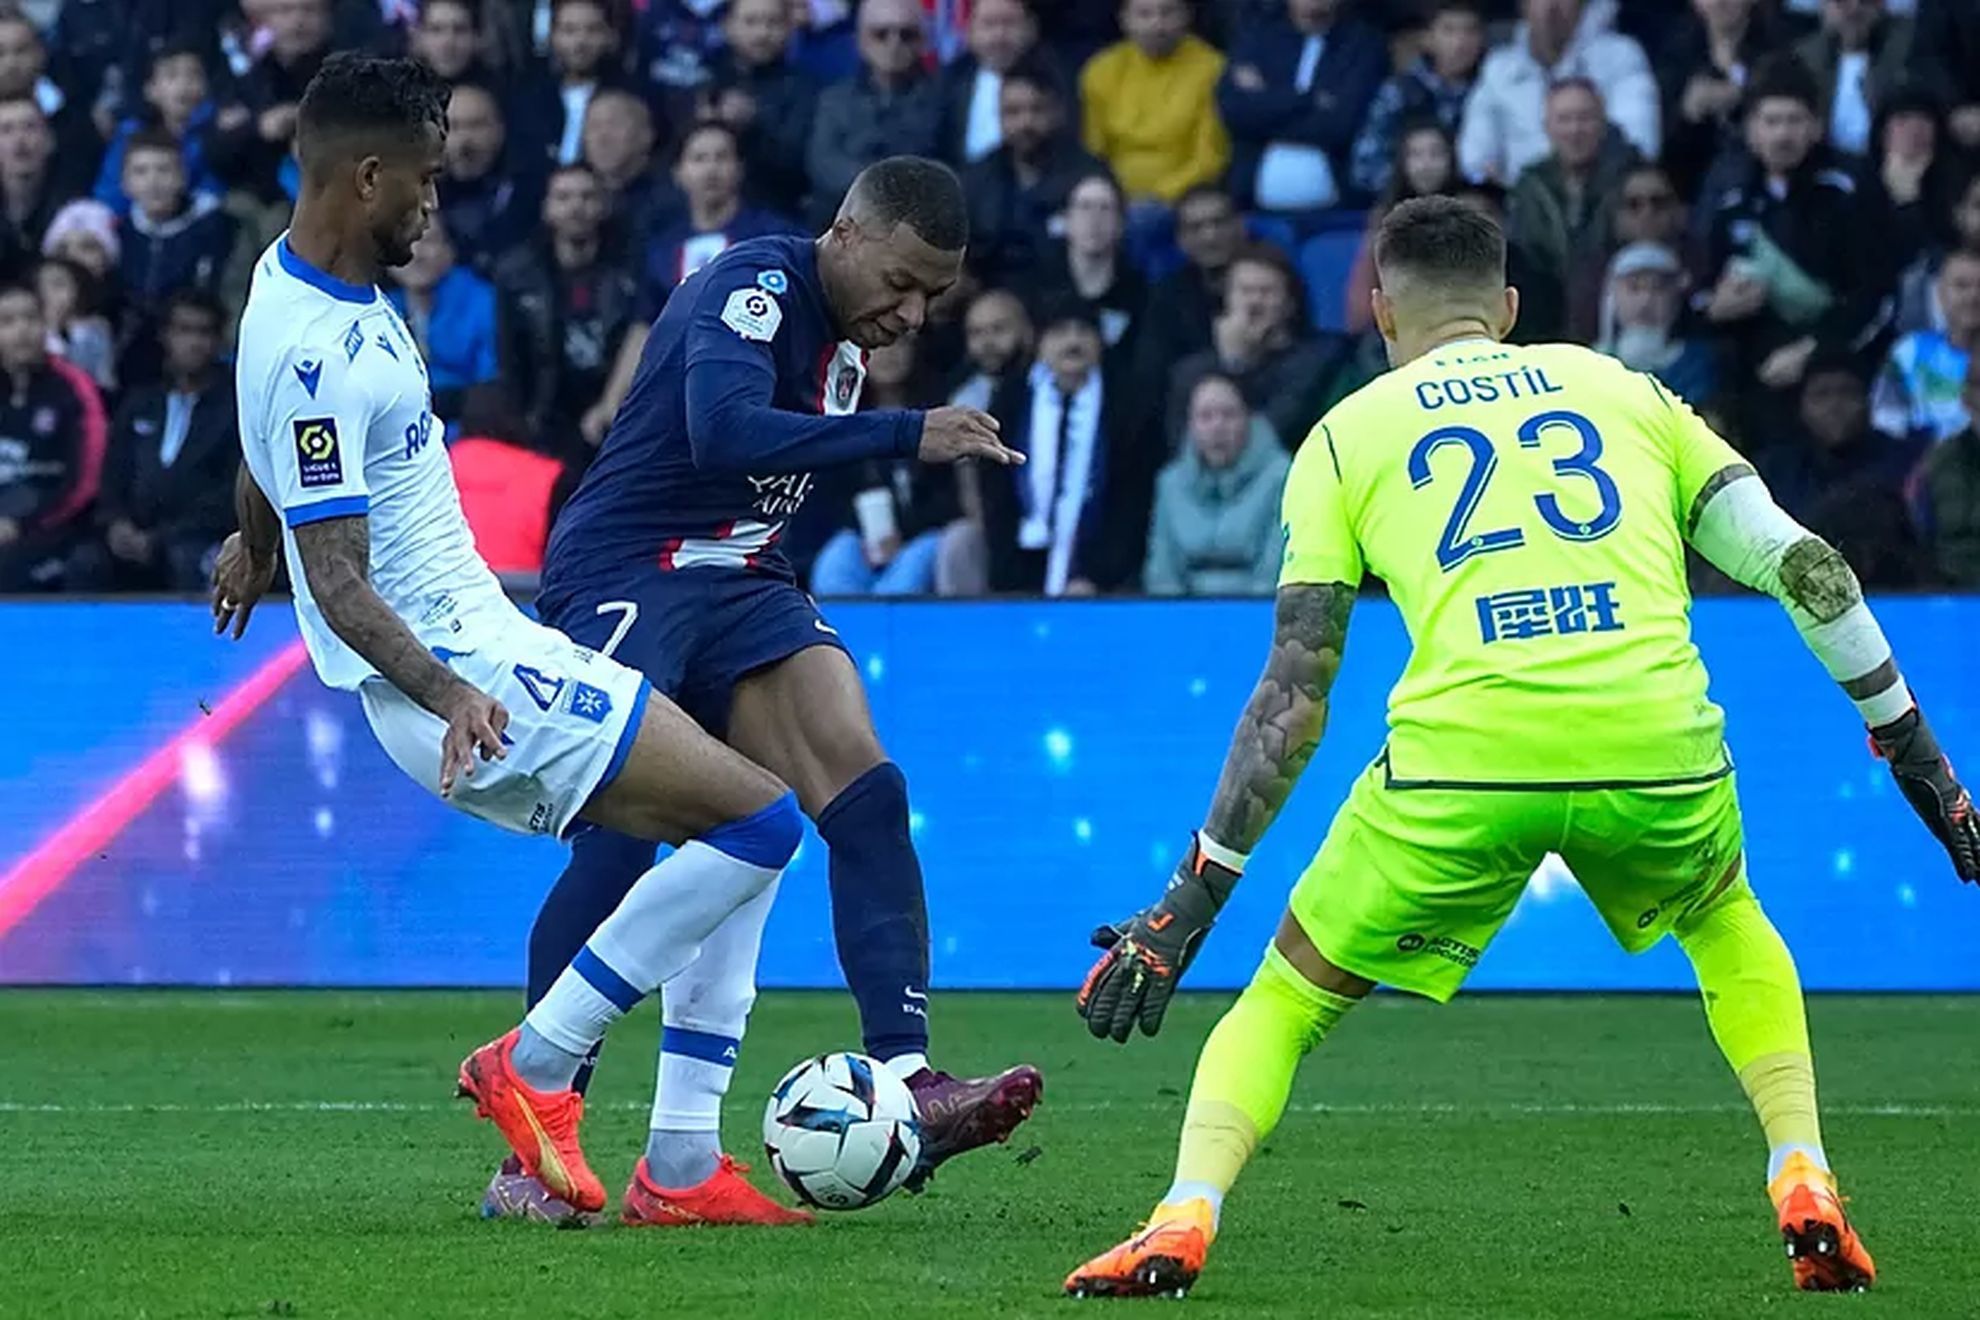 PSG trounce Auxerre 5-0 in final match before the World Cup break